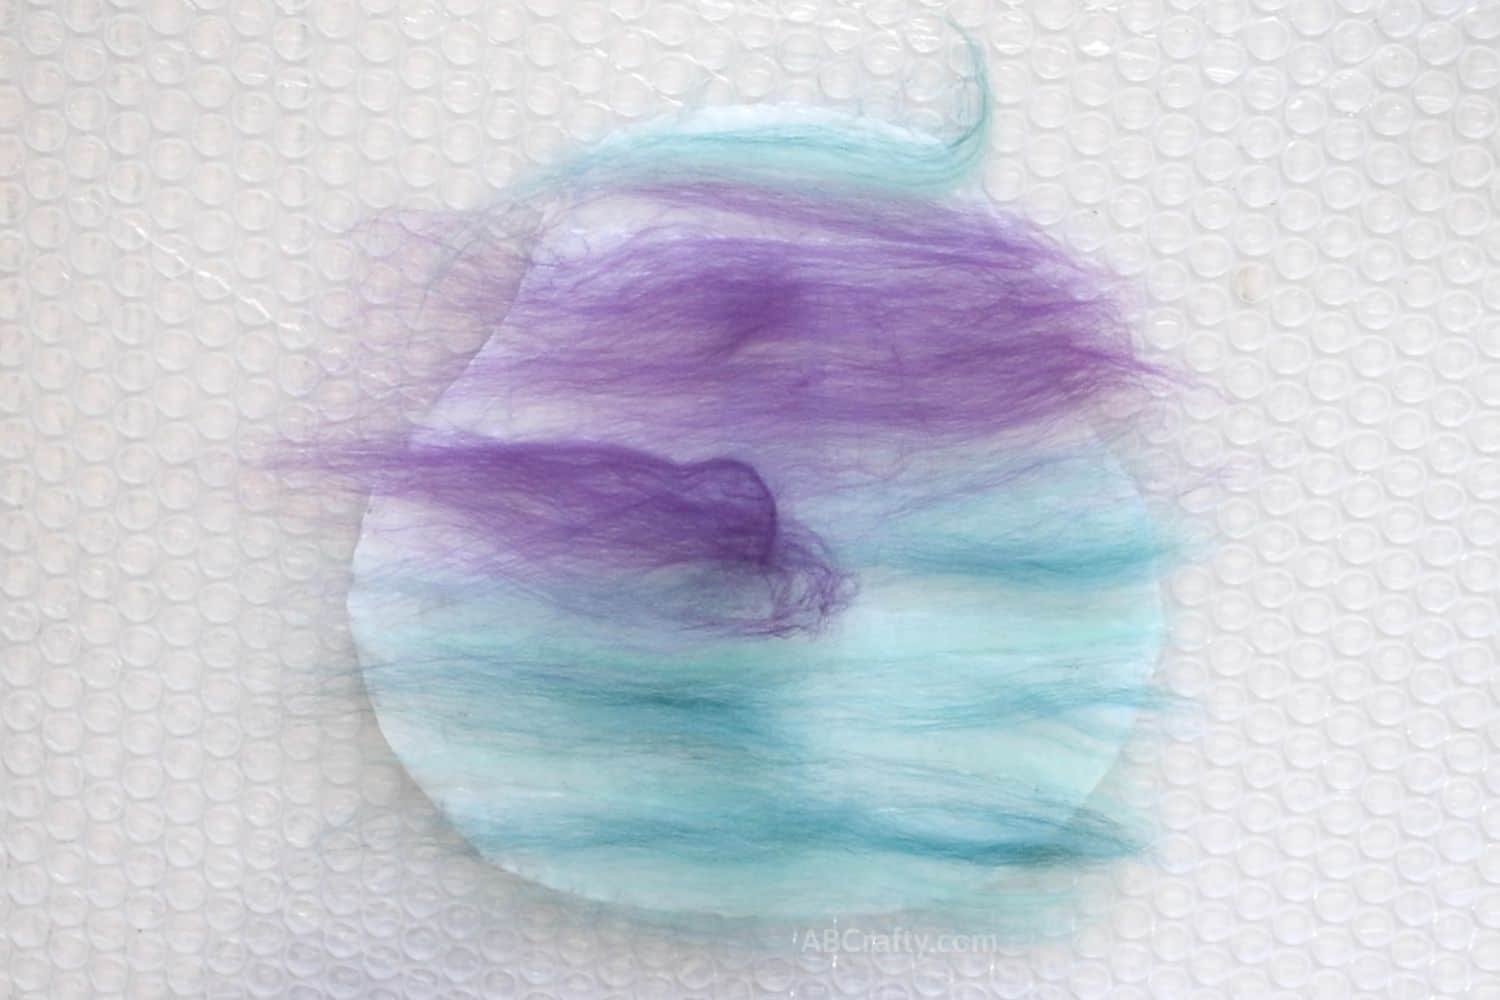 Layer of purple and teal merino wool facing one direction on top of a resist with some wool hanging off the edge